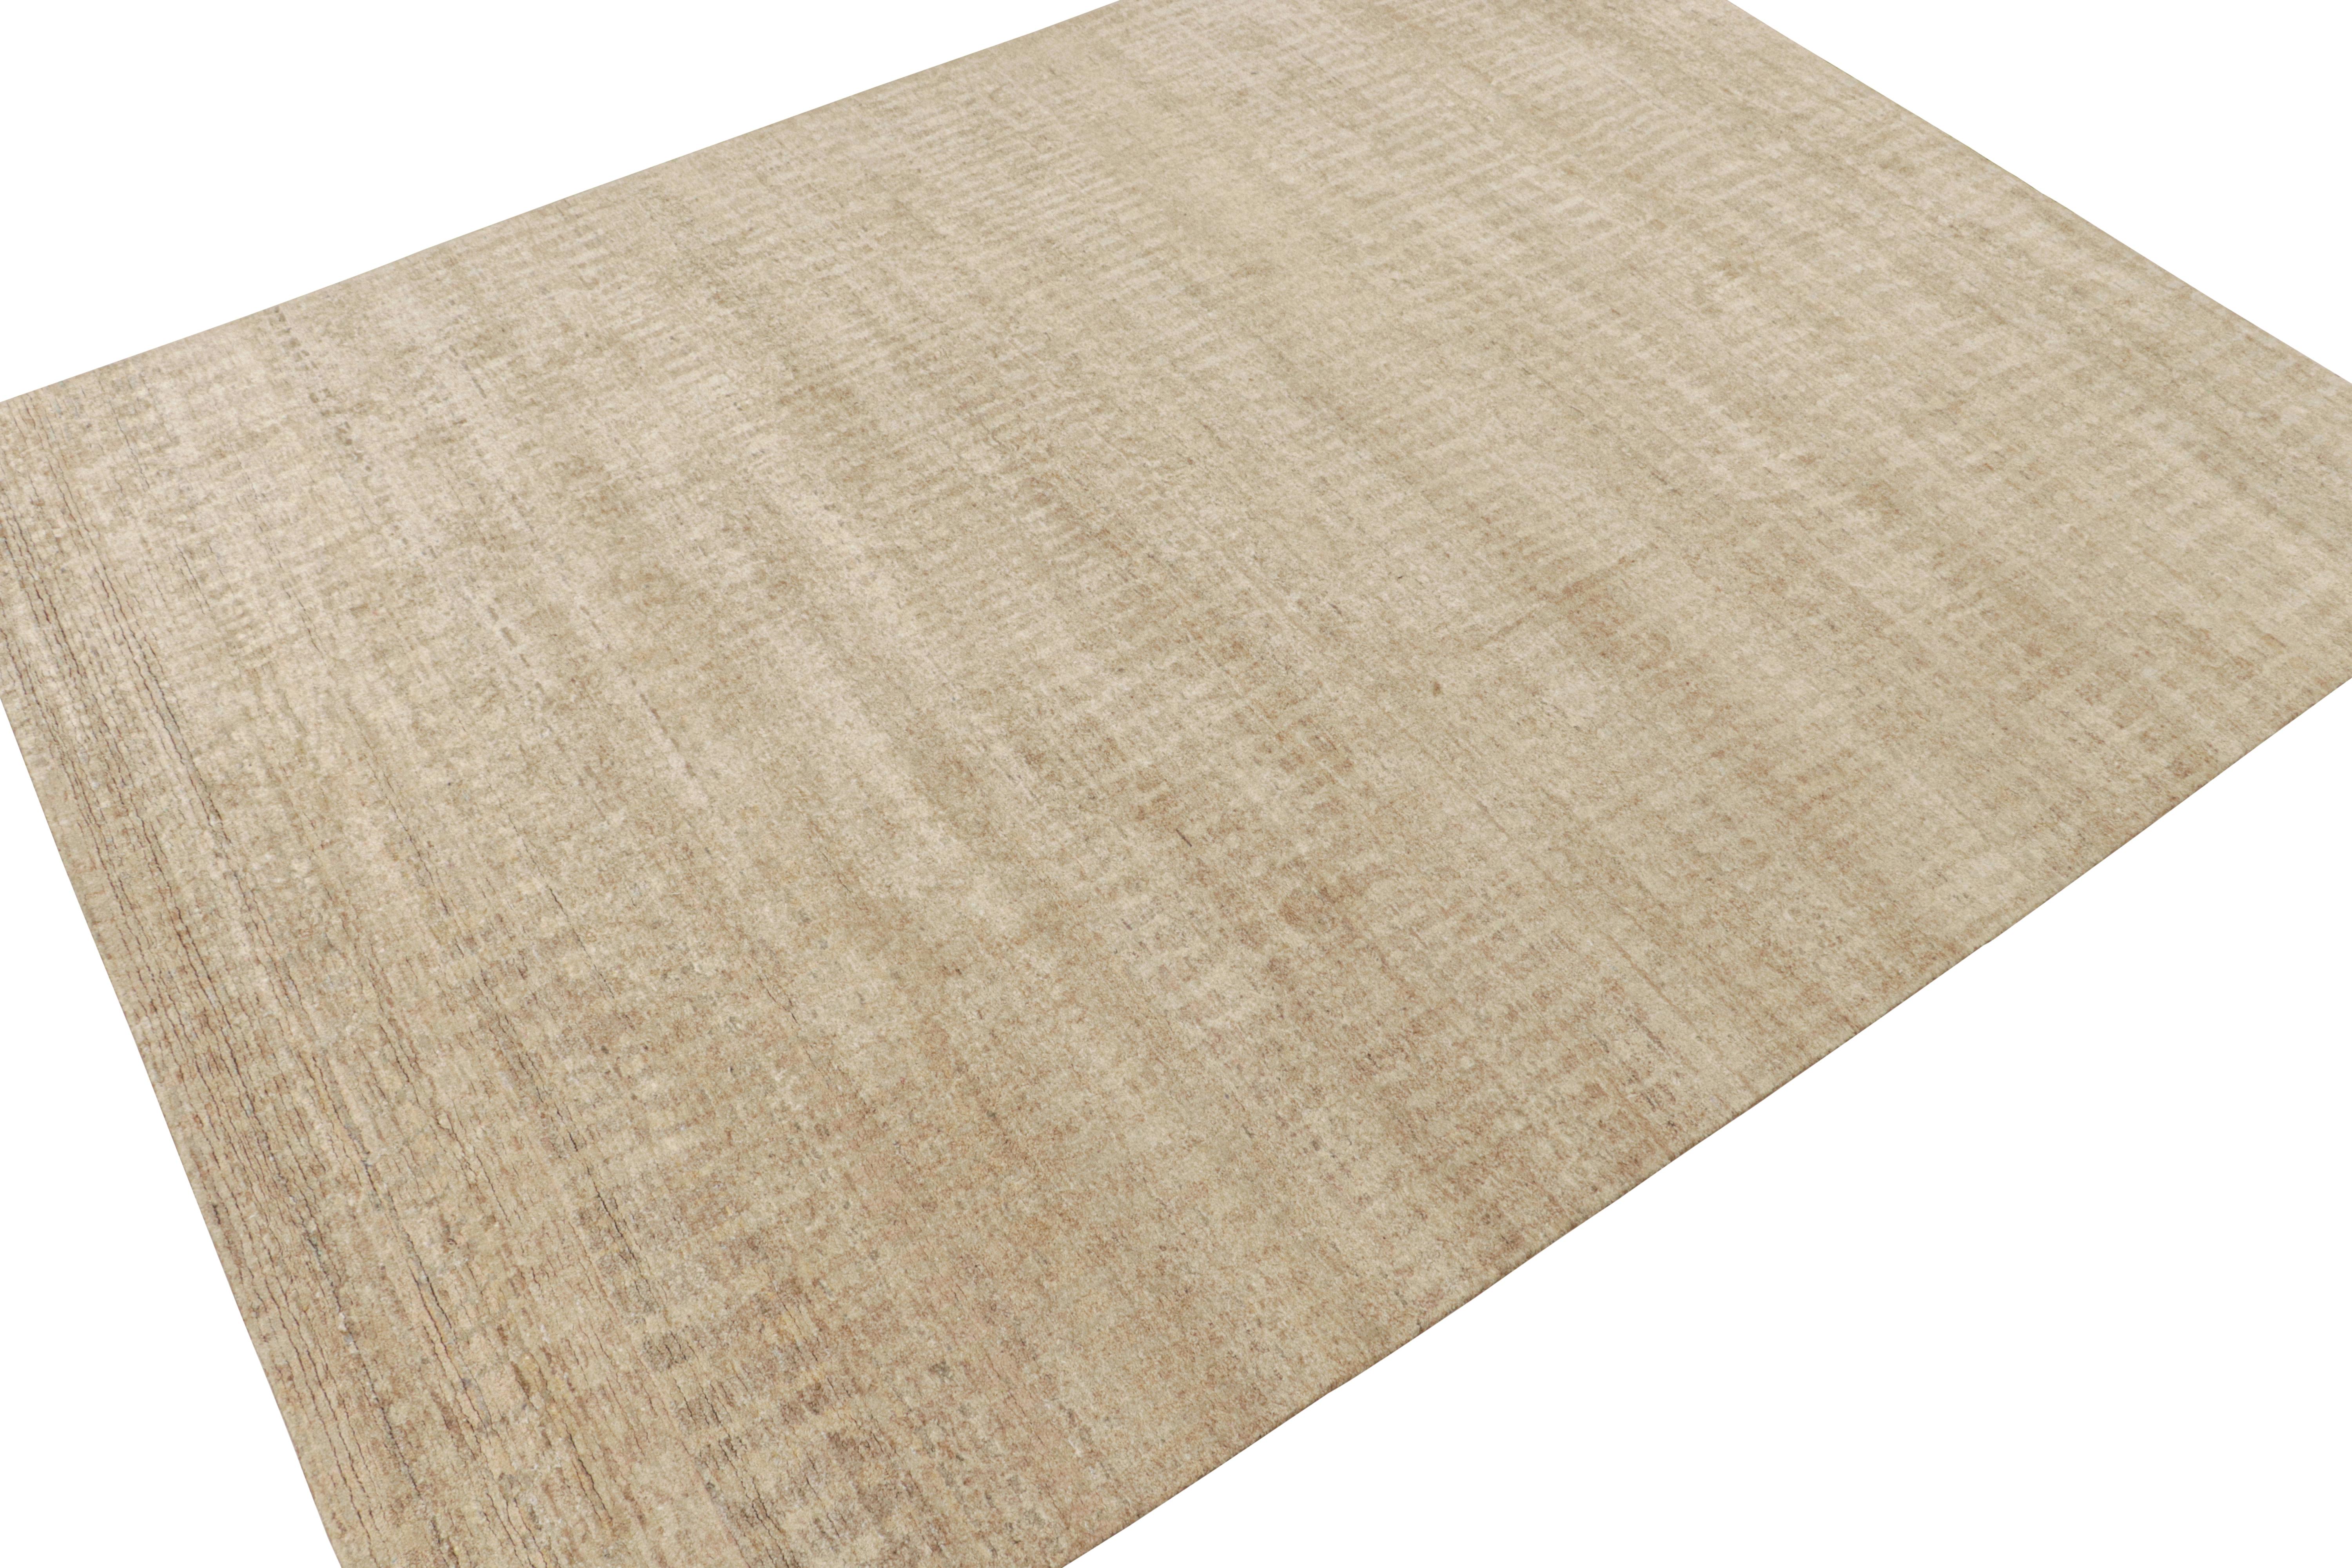 Modern Rug & Kilim’s Contemporary Rug in Beige-Brown Tone-on-tone Striae For Sale